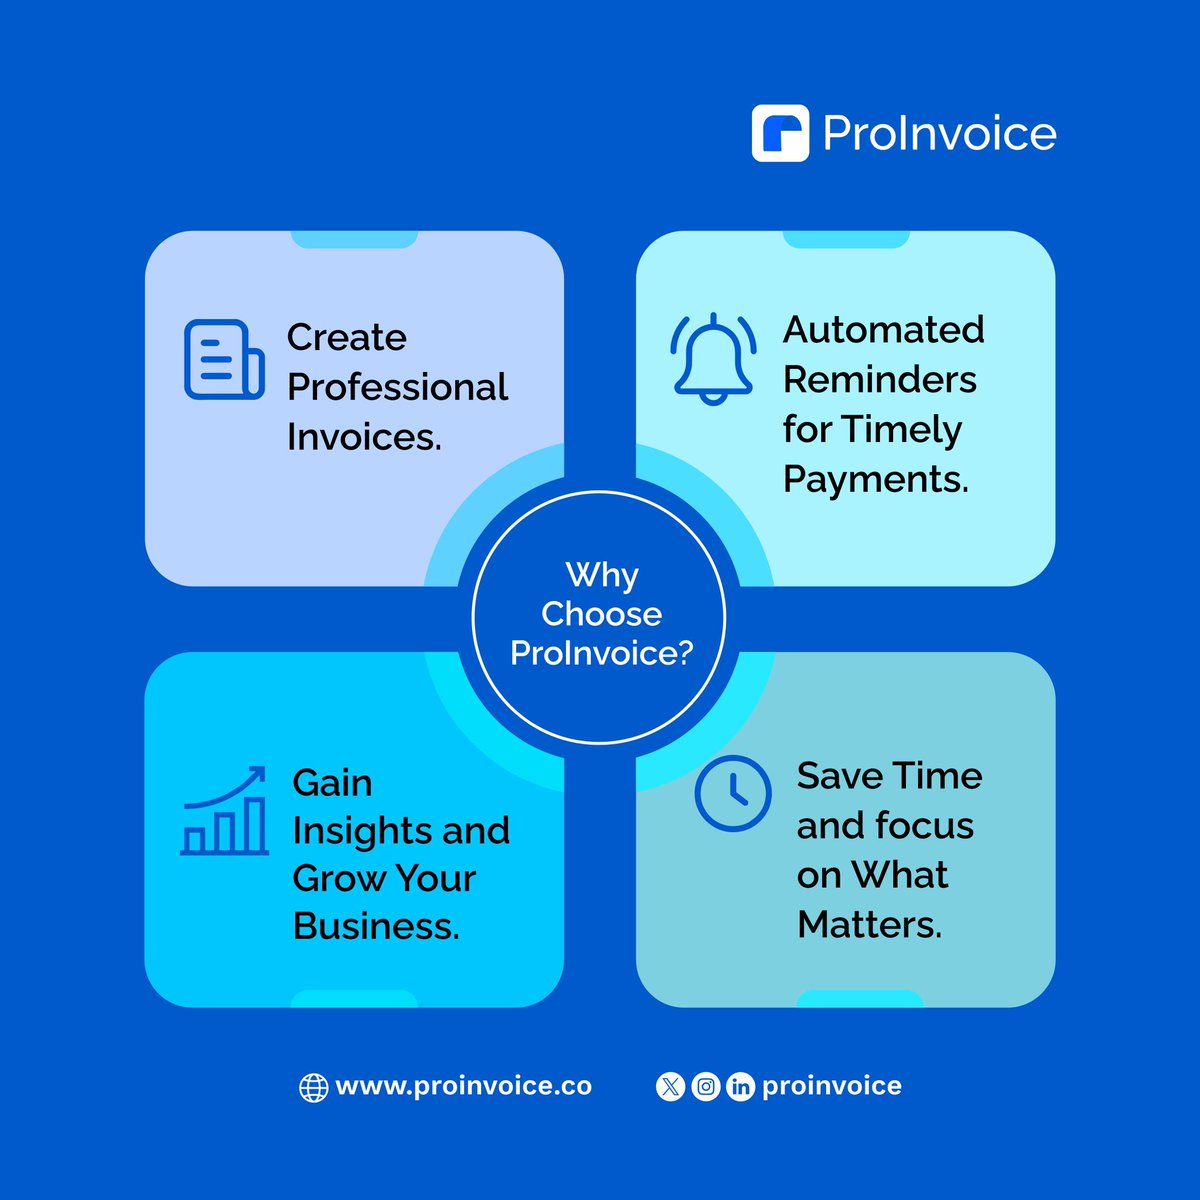 Why choose ProInvoice? 

As a business owner, these are the reasons you definitely need ProInvoice. 

Check out the flyer for details >>>>>>

Upgrade to ProInvoice Today! 

#ProInvoice #Efficiency #businessgrowth